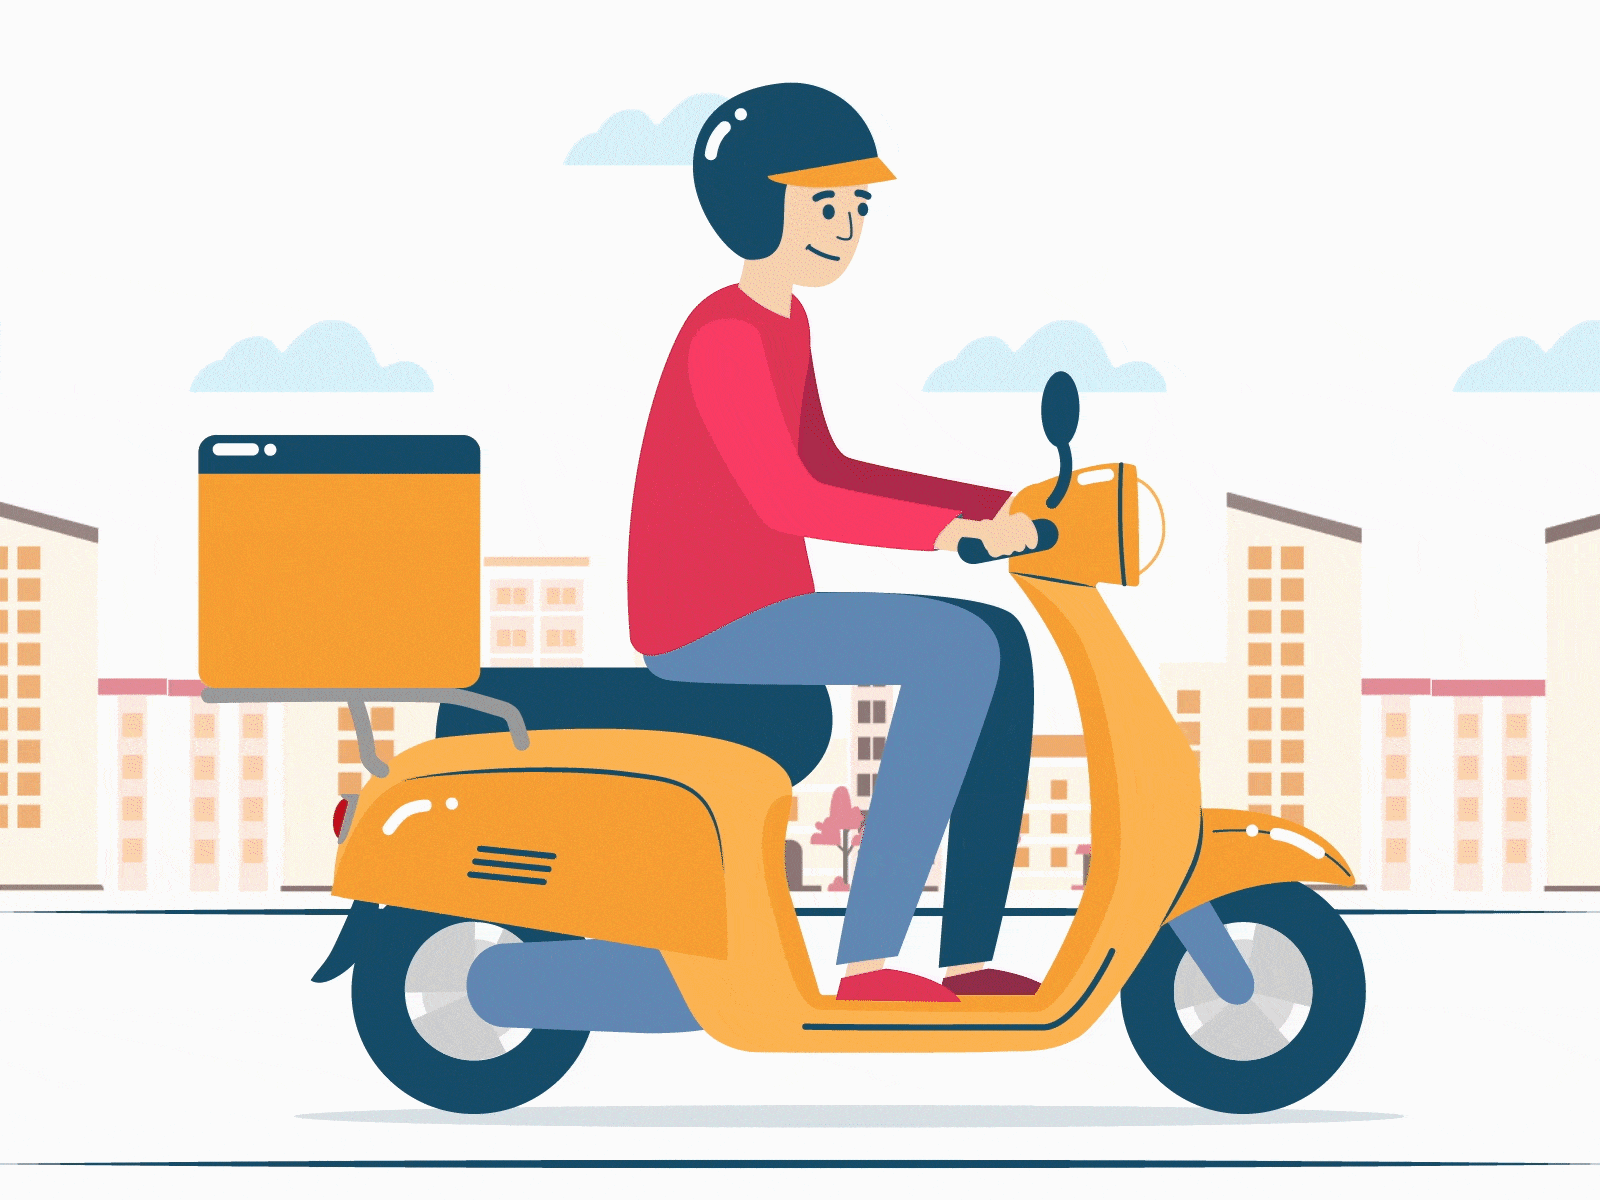 Online Delivery Boy - Animation